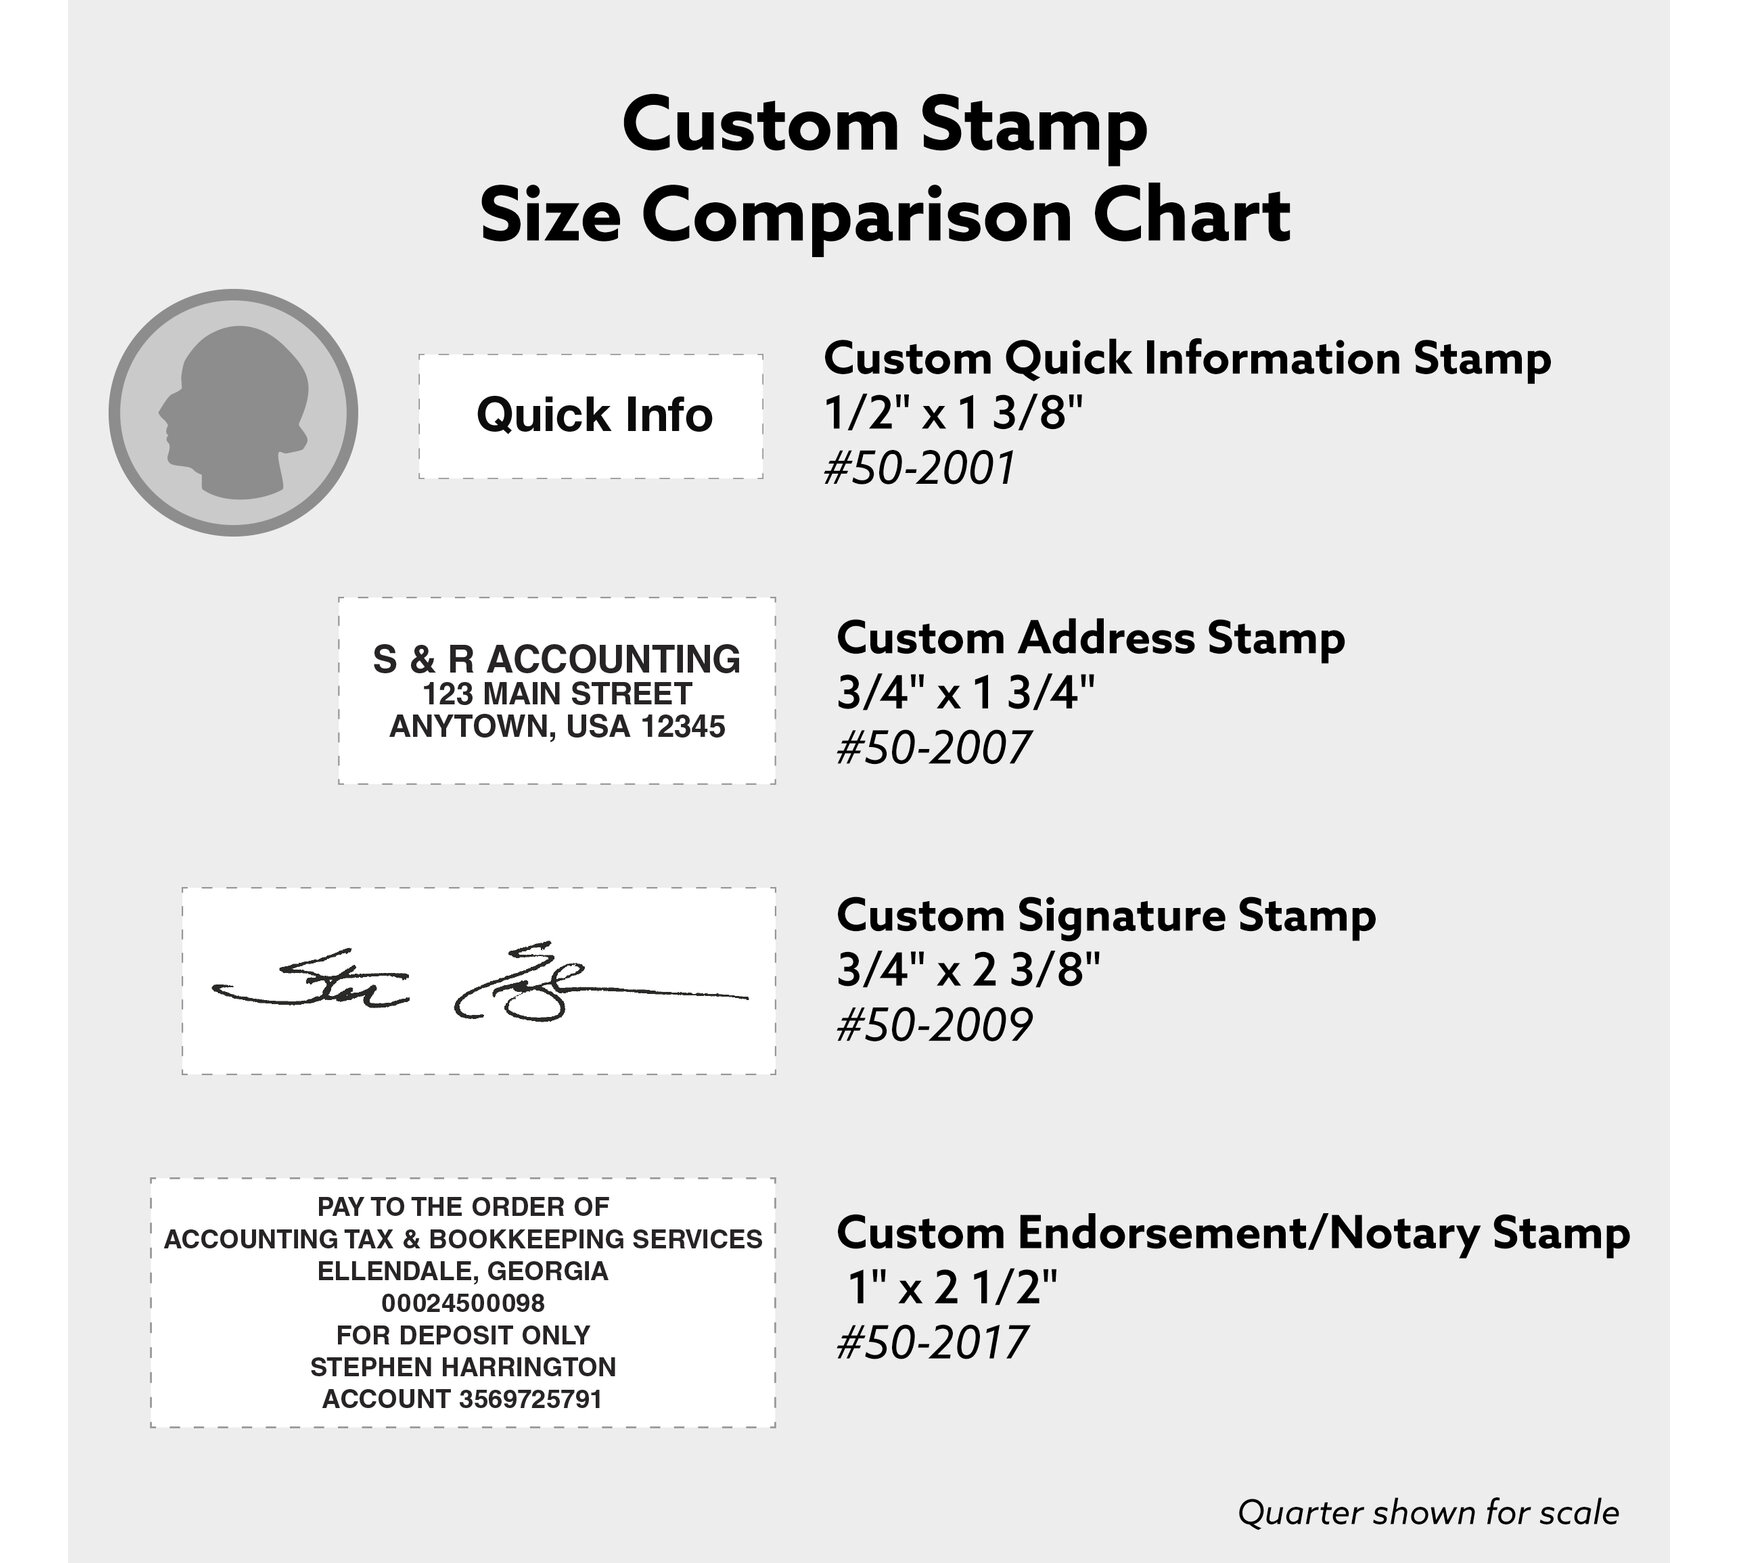 Signature Ideal Custom Self Inking Stamp - Creative Rubber Stamps